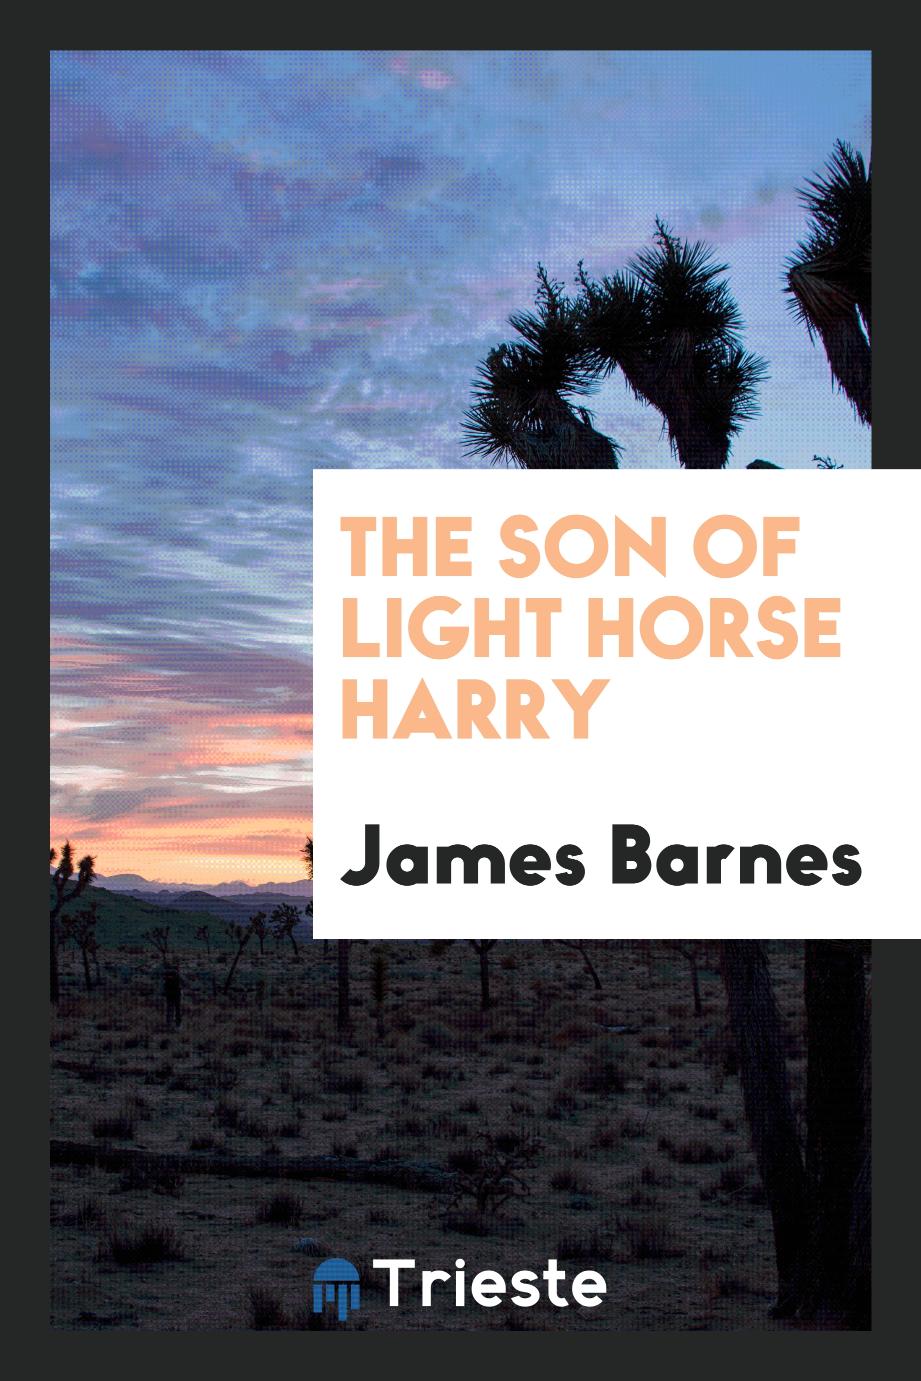 The son of Light Horse Harry